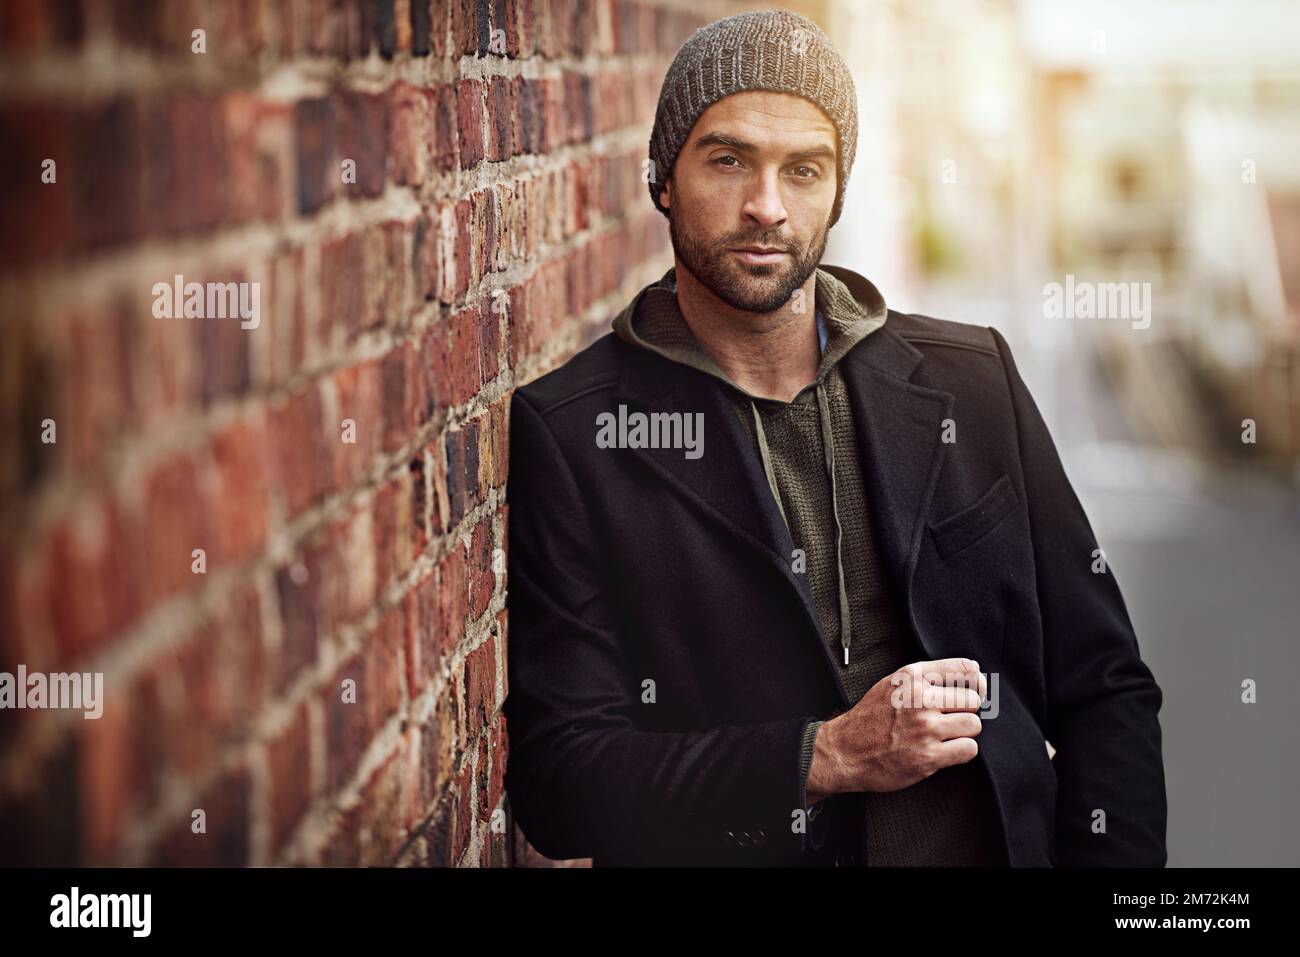 This town, its who I am. a handsome young man in trendy winter attire against a brick wall. Stock Photo